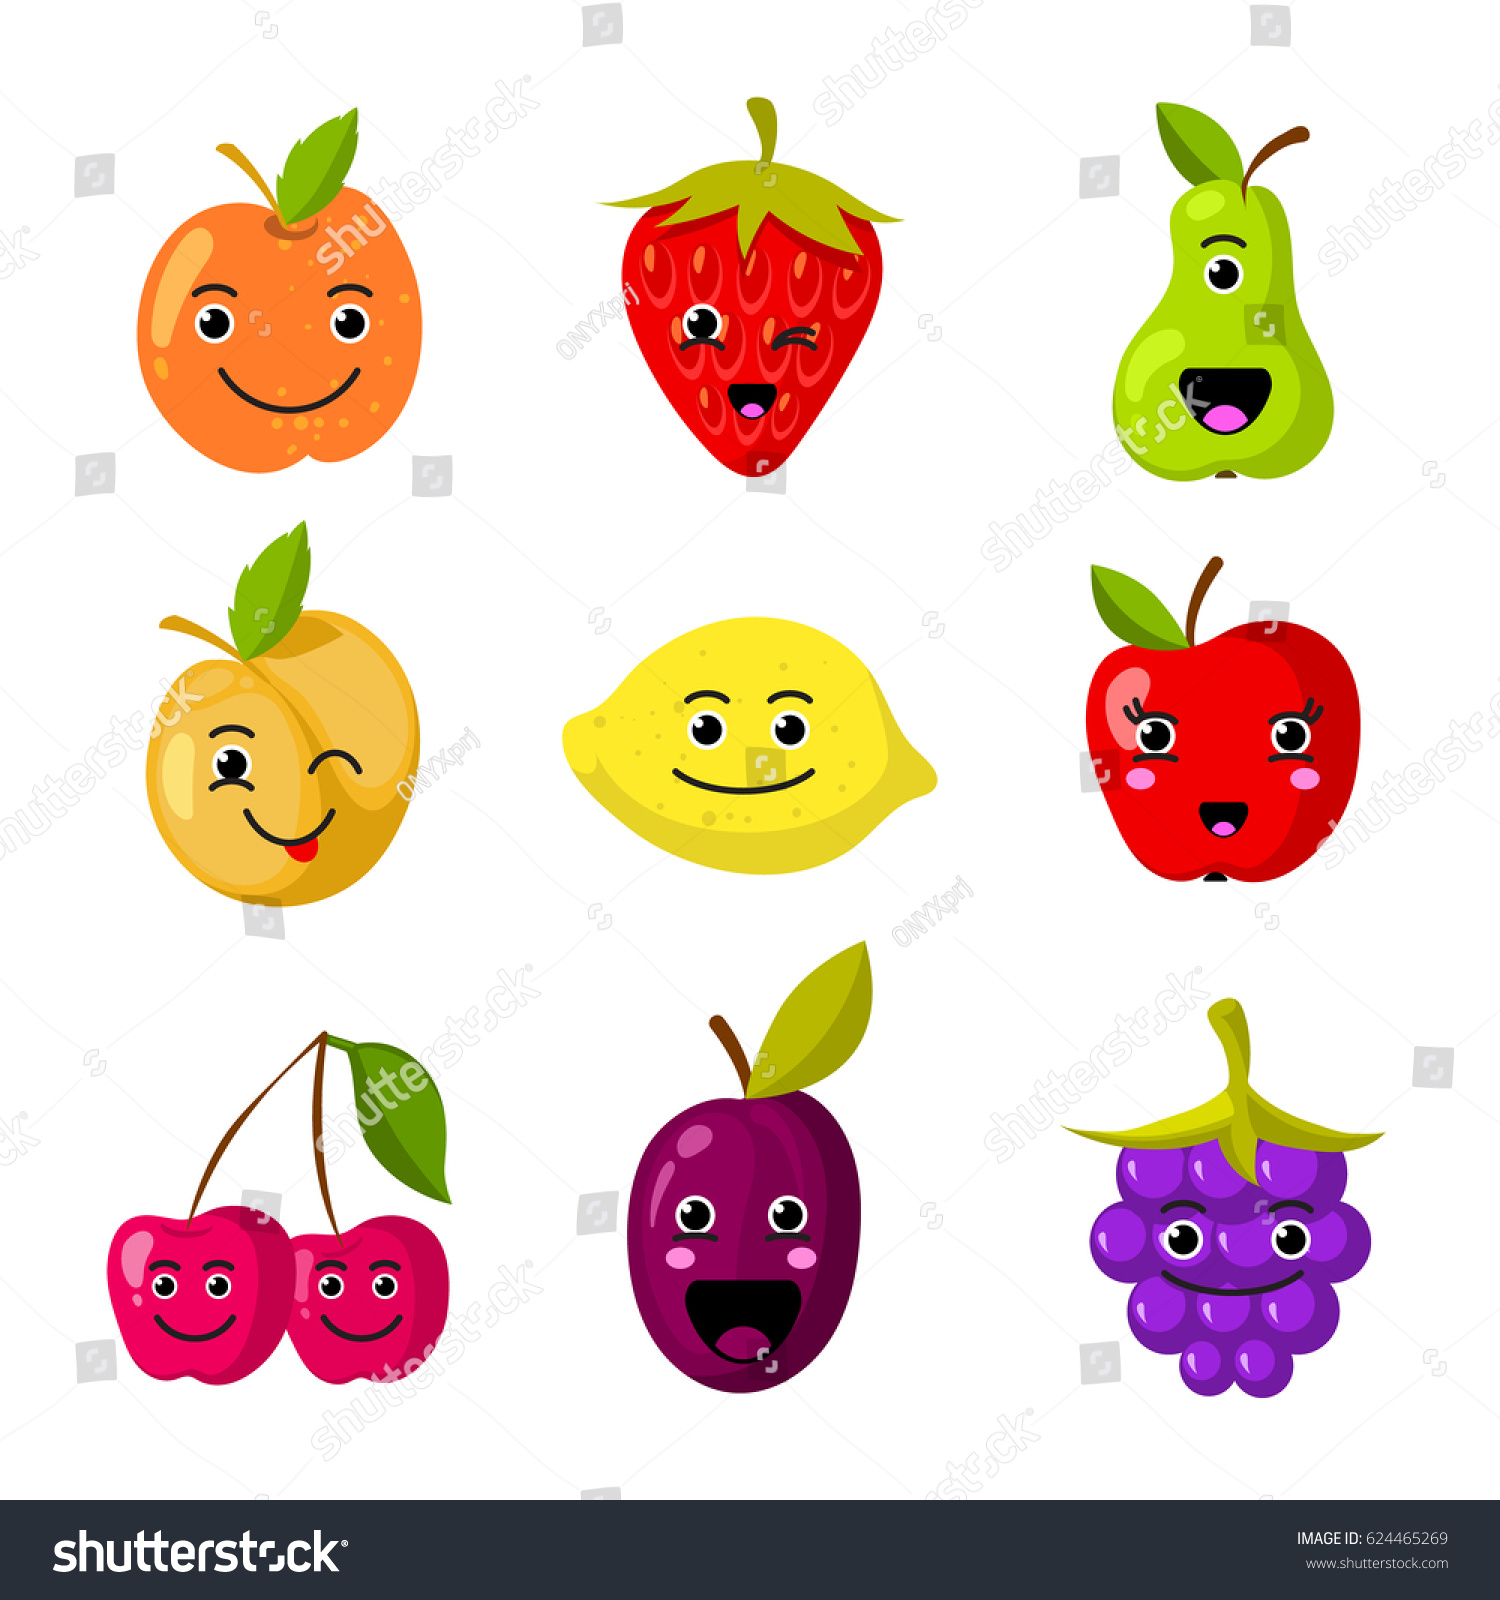 Cute Kids Fruit Vector Characters Funny Stock Vector 624465269 ...